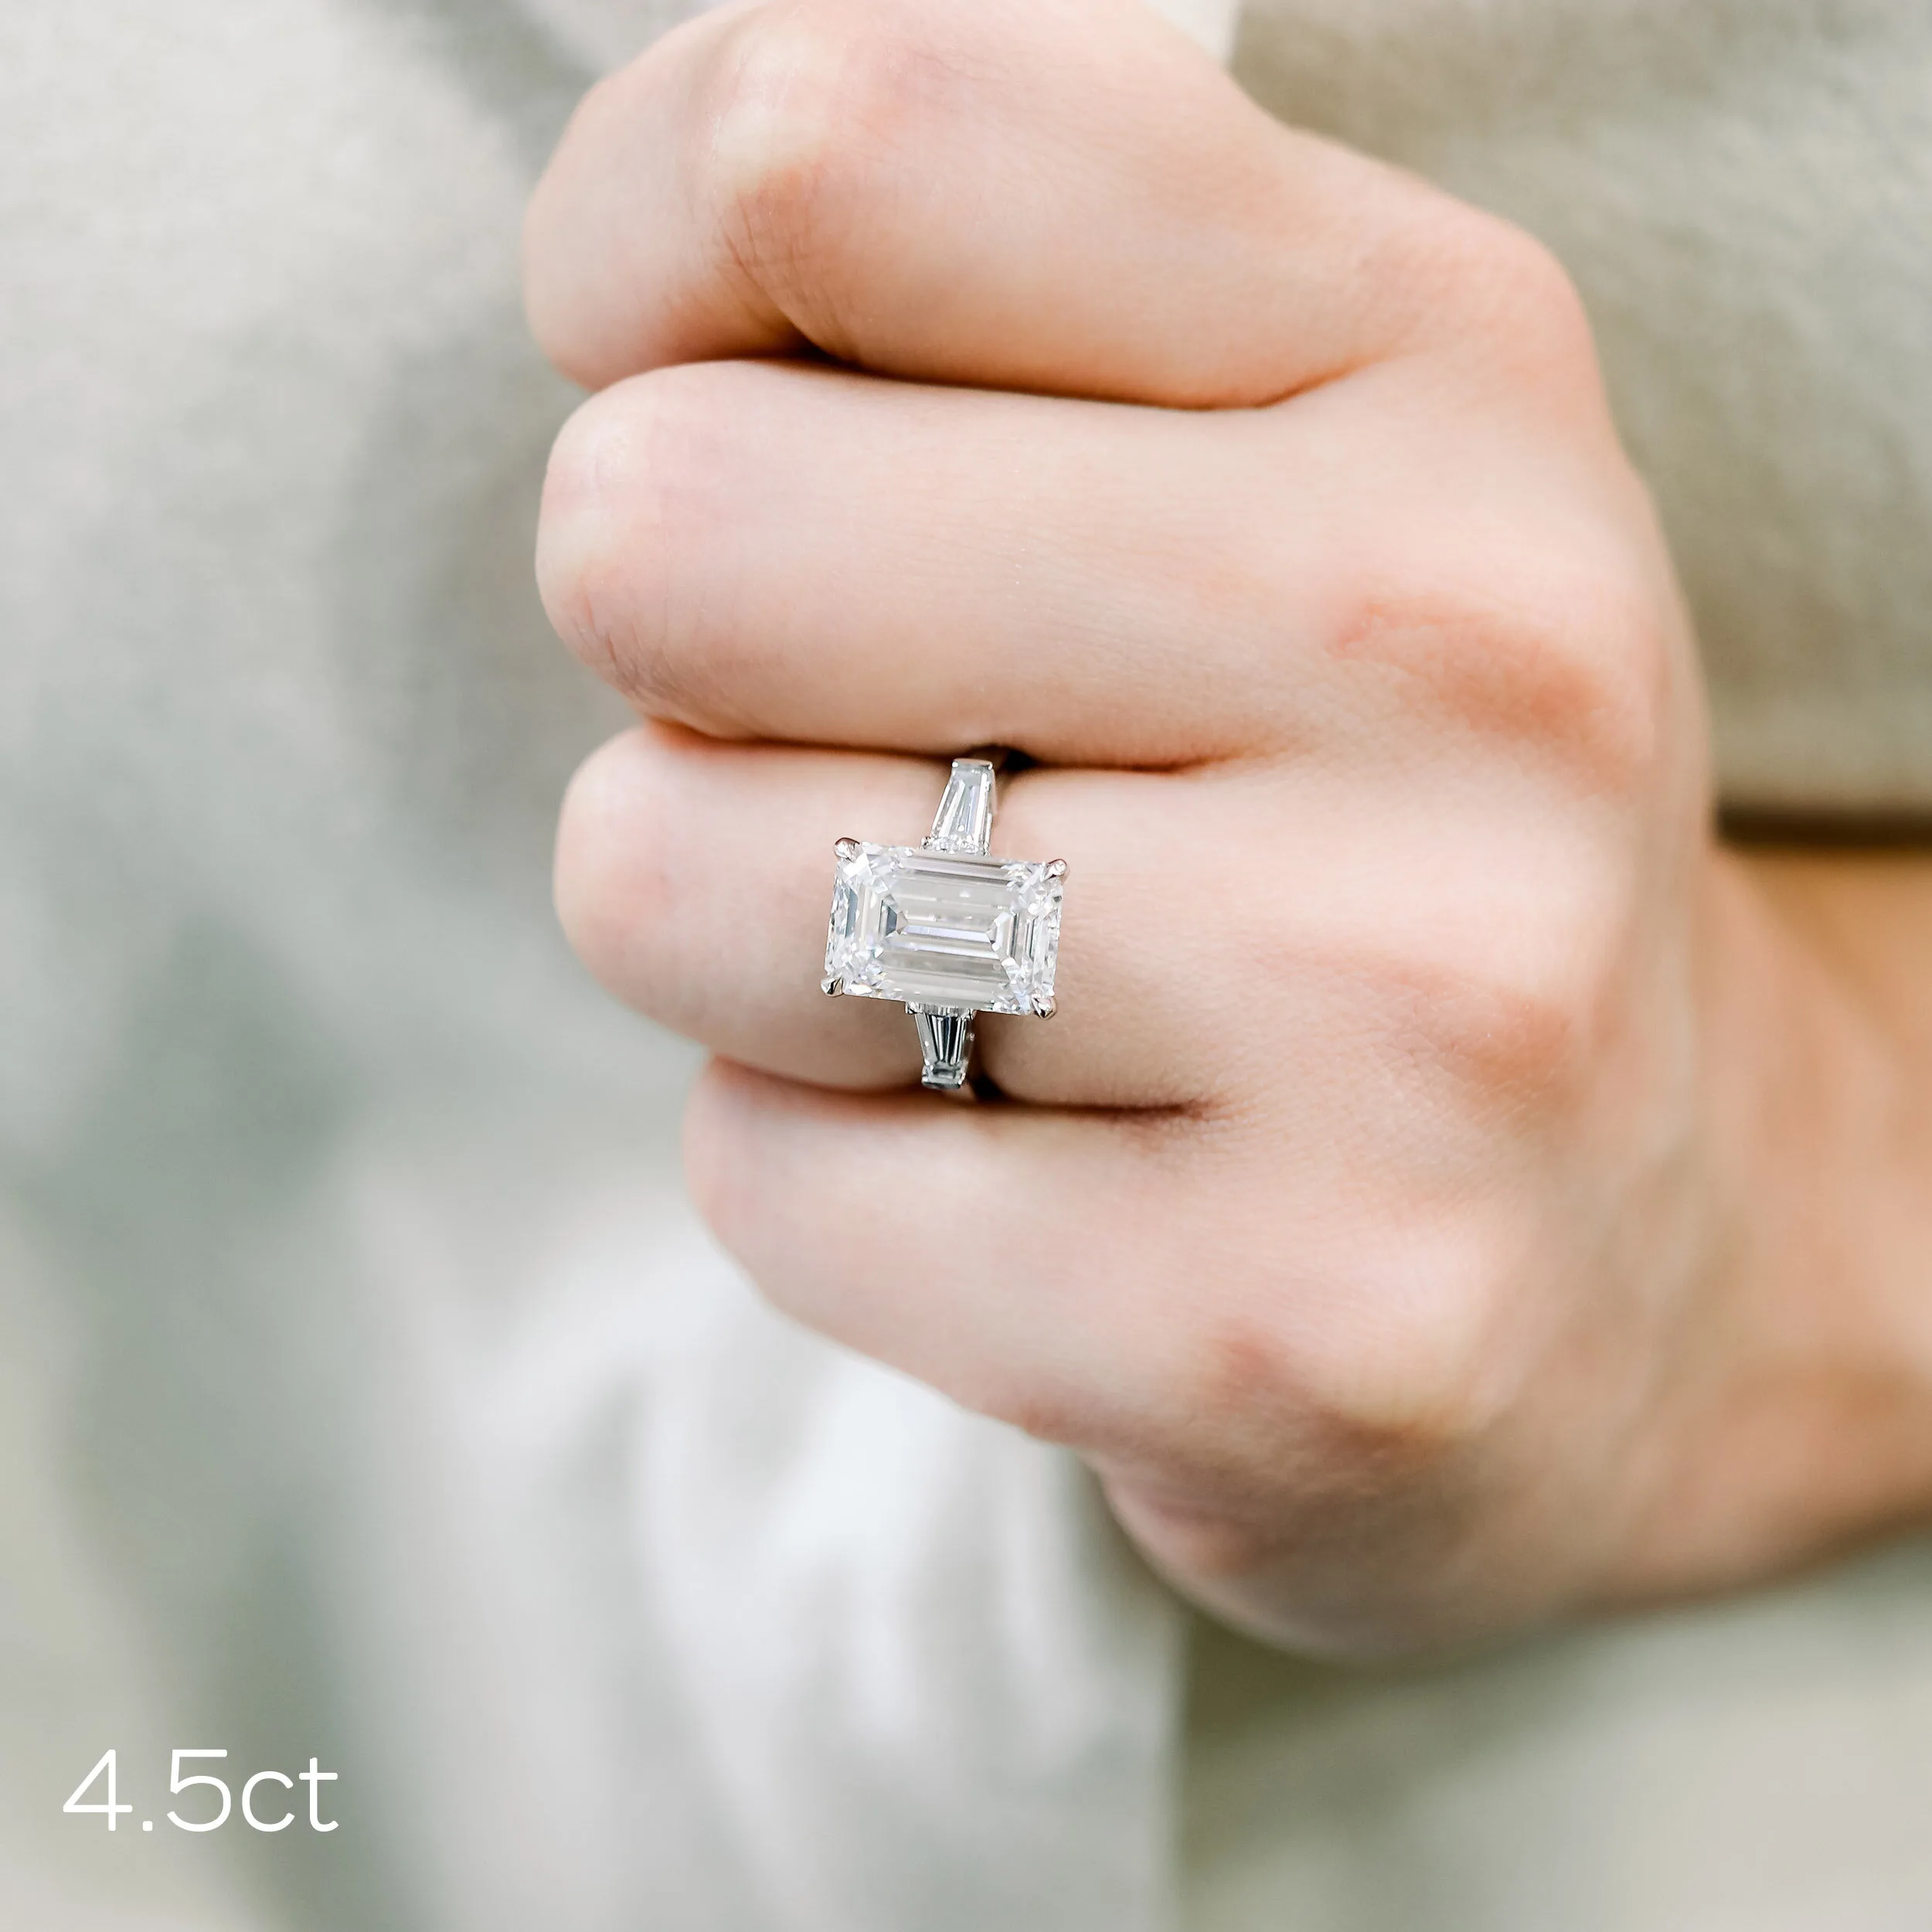 4.5ct emerald cut lab diamond in a three stone setting with tapered baguettes in platinum